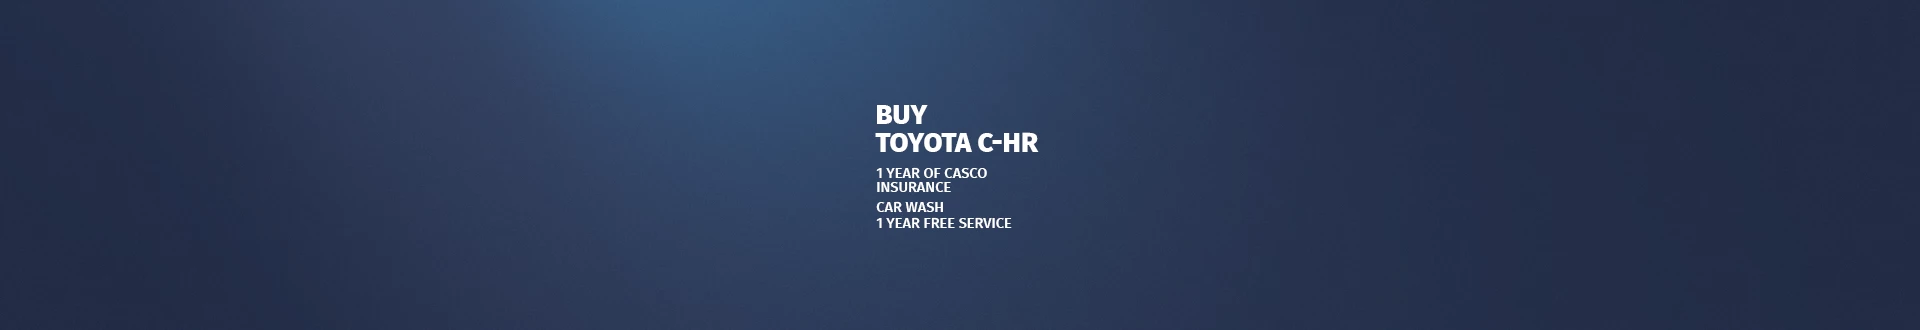 Offer Cover Image Offer for C-HR buyers